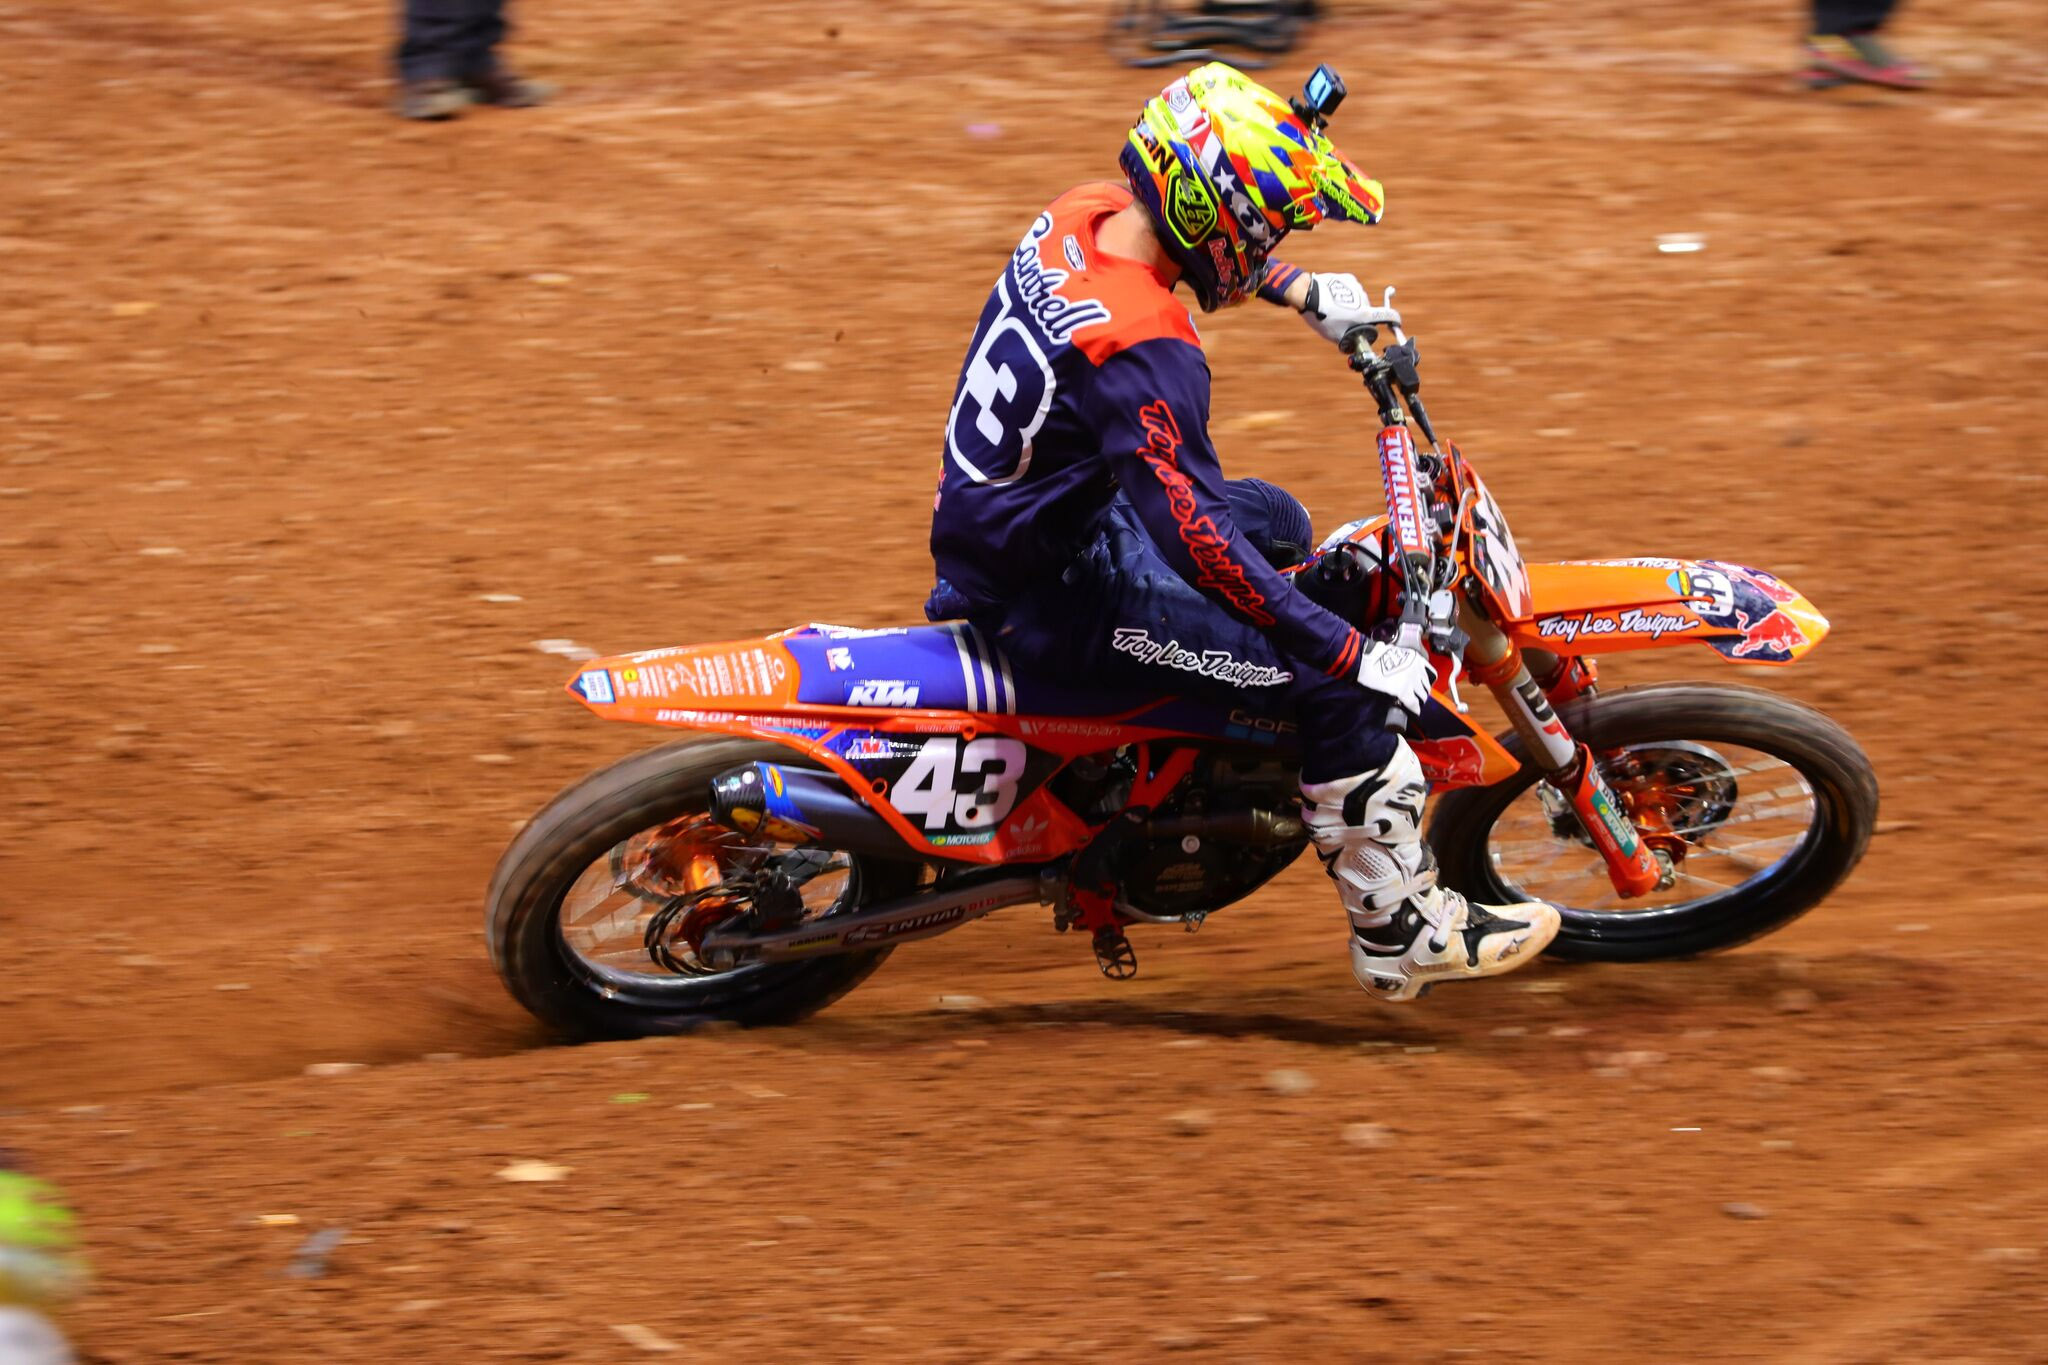 Troy Lee Designs-Red Bull-KTM’s Cantrell had been able to showcase his speed but on Saturday night luck was not on his side